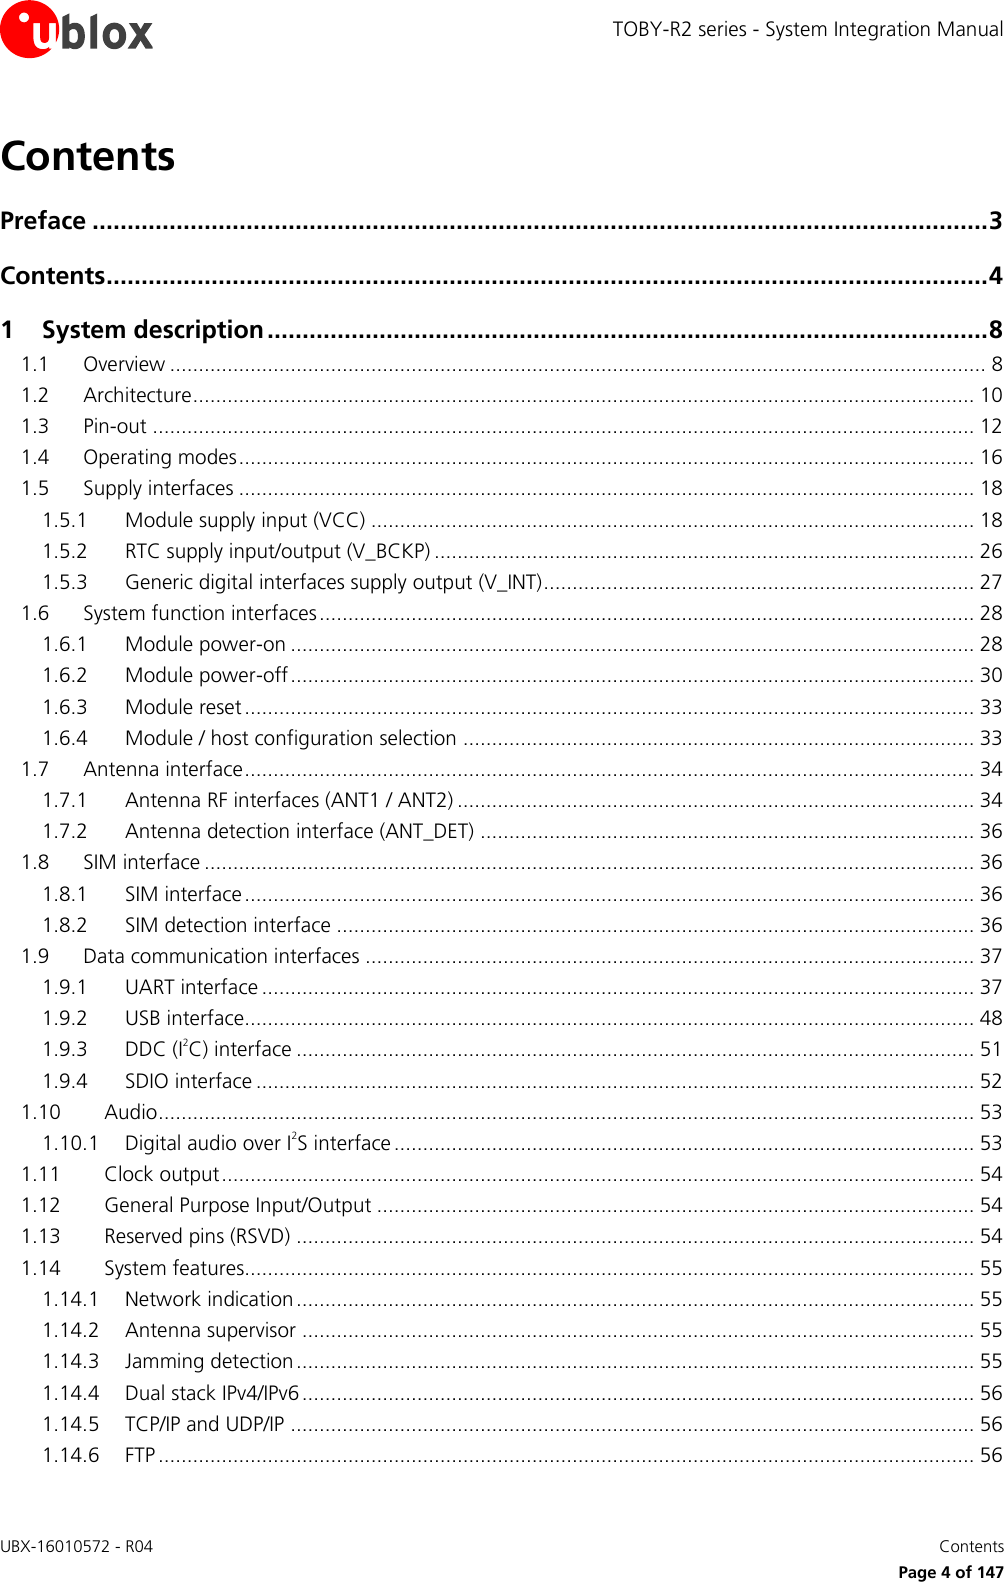 TOBY-R2 series - System Integration Manual UBX-16010572 - R04    Contents     Page 4 of 147 Contents Preface ................................................................................................................................ 3 Contents .............................................................................................................................. 4 1 System description ....................................................................................................... 8 1.1 Overview .............................................................................................................................................. 8 1.2 Architecture ........................................................................................................................................ 10 1.3 Pin-out ............................................................................................................................................... 12 1.4 Operating modes ................................................................................................................................ 16 1.5 Supply interfaces ................................................................................................................................ 18 1.5.1 Module supply input (VCC) ......................................................................................................... 18 1.5.2 RTC supply input/output (V_BCKP) .............................................................................................. 26 1.5.3 Generic digital interfaces supply output (V_INT) ........................................................................... 27 1.6 System function interfaces .................................................................................................................. 28 1.6.1 Module power-on ....................................................................................................................... 28 1.6.2 Module power-off ....................................................................................................................... 30 1.6.3 Module reset ............................................................................................................................... 33 1.6.4 Module / host configuration selection ......................................................................................... 33 1.7 Antenna interface ............................................................................................................................... 34 1.7.1 Antenna RF interfaces (ANT1 / ANT2) .......................................................................................... 34 1.7.2 Antenna detection interface (ANT_DET) ...................................................................................... 36 1.8 SIM interface ...................................................................................................................................... 36 1.8.1 SIM interface ............................................................................................................................... 36 1.8.2 SIM detection interface ............................................................................................................... 36 1.9 Data communication interfaces .......................................................................................................... 37 1.9.1 UART interface ............................................................................................................................ 37 1.9.2 USB interface............................................................................................................................... 48 1.9.3 DDC (I2C) interface ...................................................................................................................... 51 1.9.4 SDIO interface ............................................................................................................................. 52 1.10 Audio .............................................................................................................................................. 53 1.10.1 Digital audio over I2S interface ..................................................................................................... 53 1.11 Clock output ................................................................................................................................... 54 1.12 General Purpose Input/Output ........................................................................................................ 54 1.13 Reserved pins (RSVD) ...................................................................................................................... 54 1.14 System features............................................................................................................................... 55 1.14.1 Network indication ...................................................................................................................... 55 1.14.2 Antenna supervisor ..................................................................................................................... 55 1.14.3 Jamming detection ...................................................................................................................... 55 1.14.4 Dual stack IPv4/IPv6 ..................................................................................................................... 56 1.14.5 TCP/IP and UDP/IP ....................................................................................................................... 56 1.14.6 FTP .............................................................................................................................................. 56 